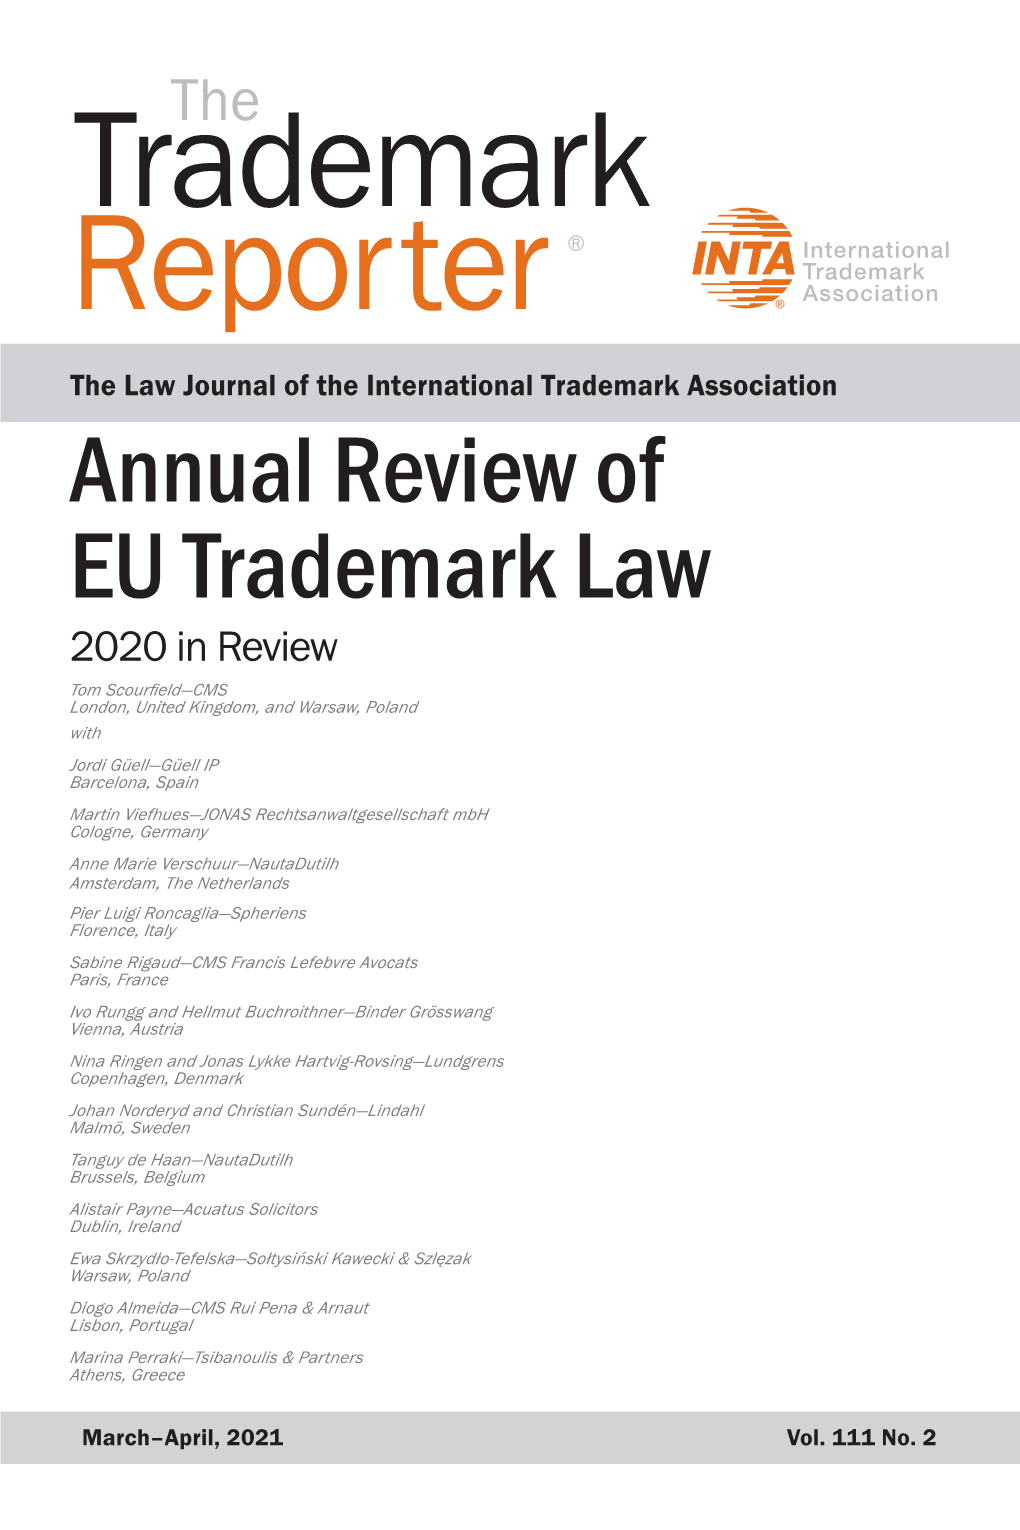 Annual Review of EU Trademark Law: 2020 in Review, 111 TMR 505 (2021)